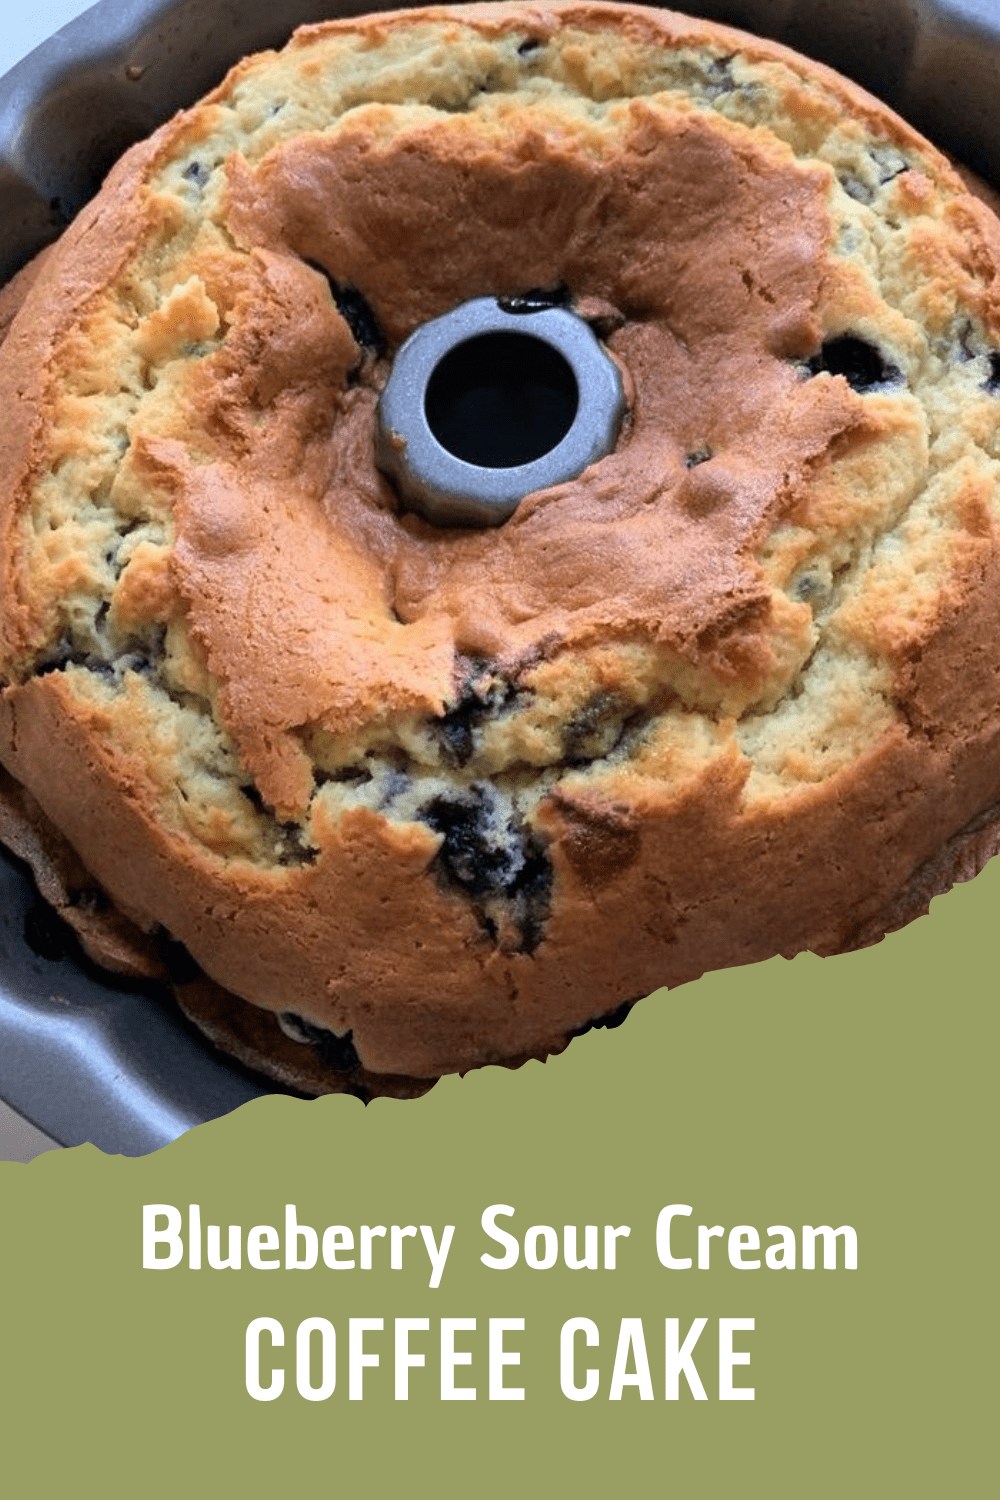 Blueberry Sour Cream Coffee Cake - middleeastsector